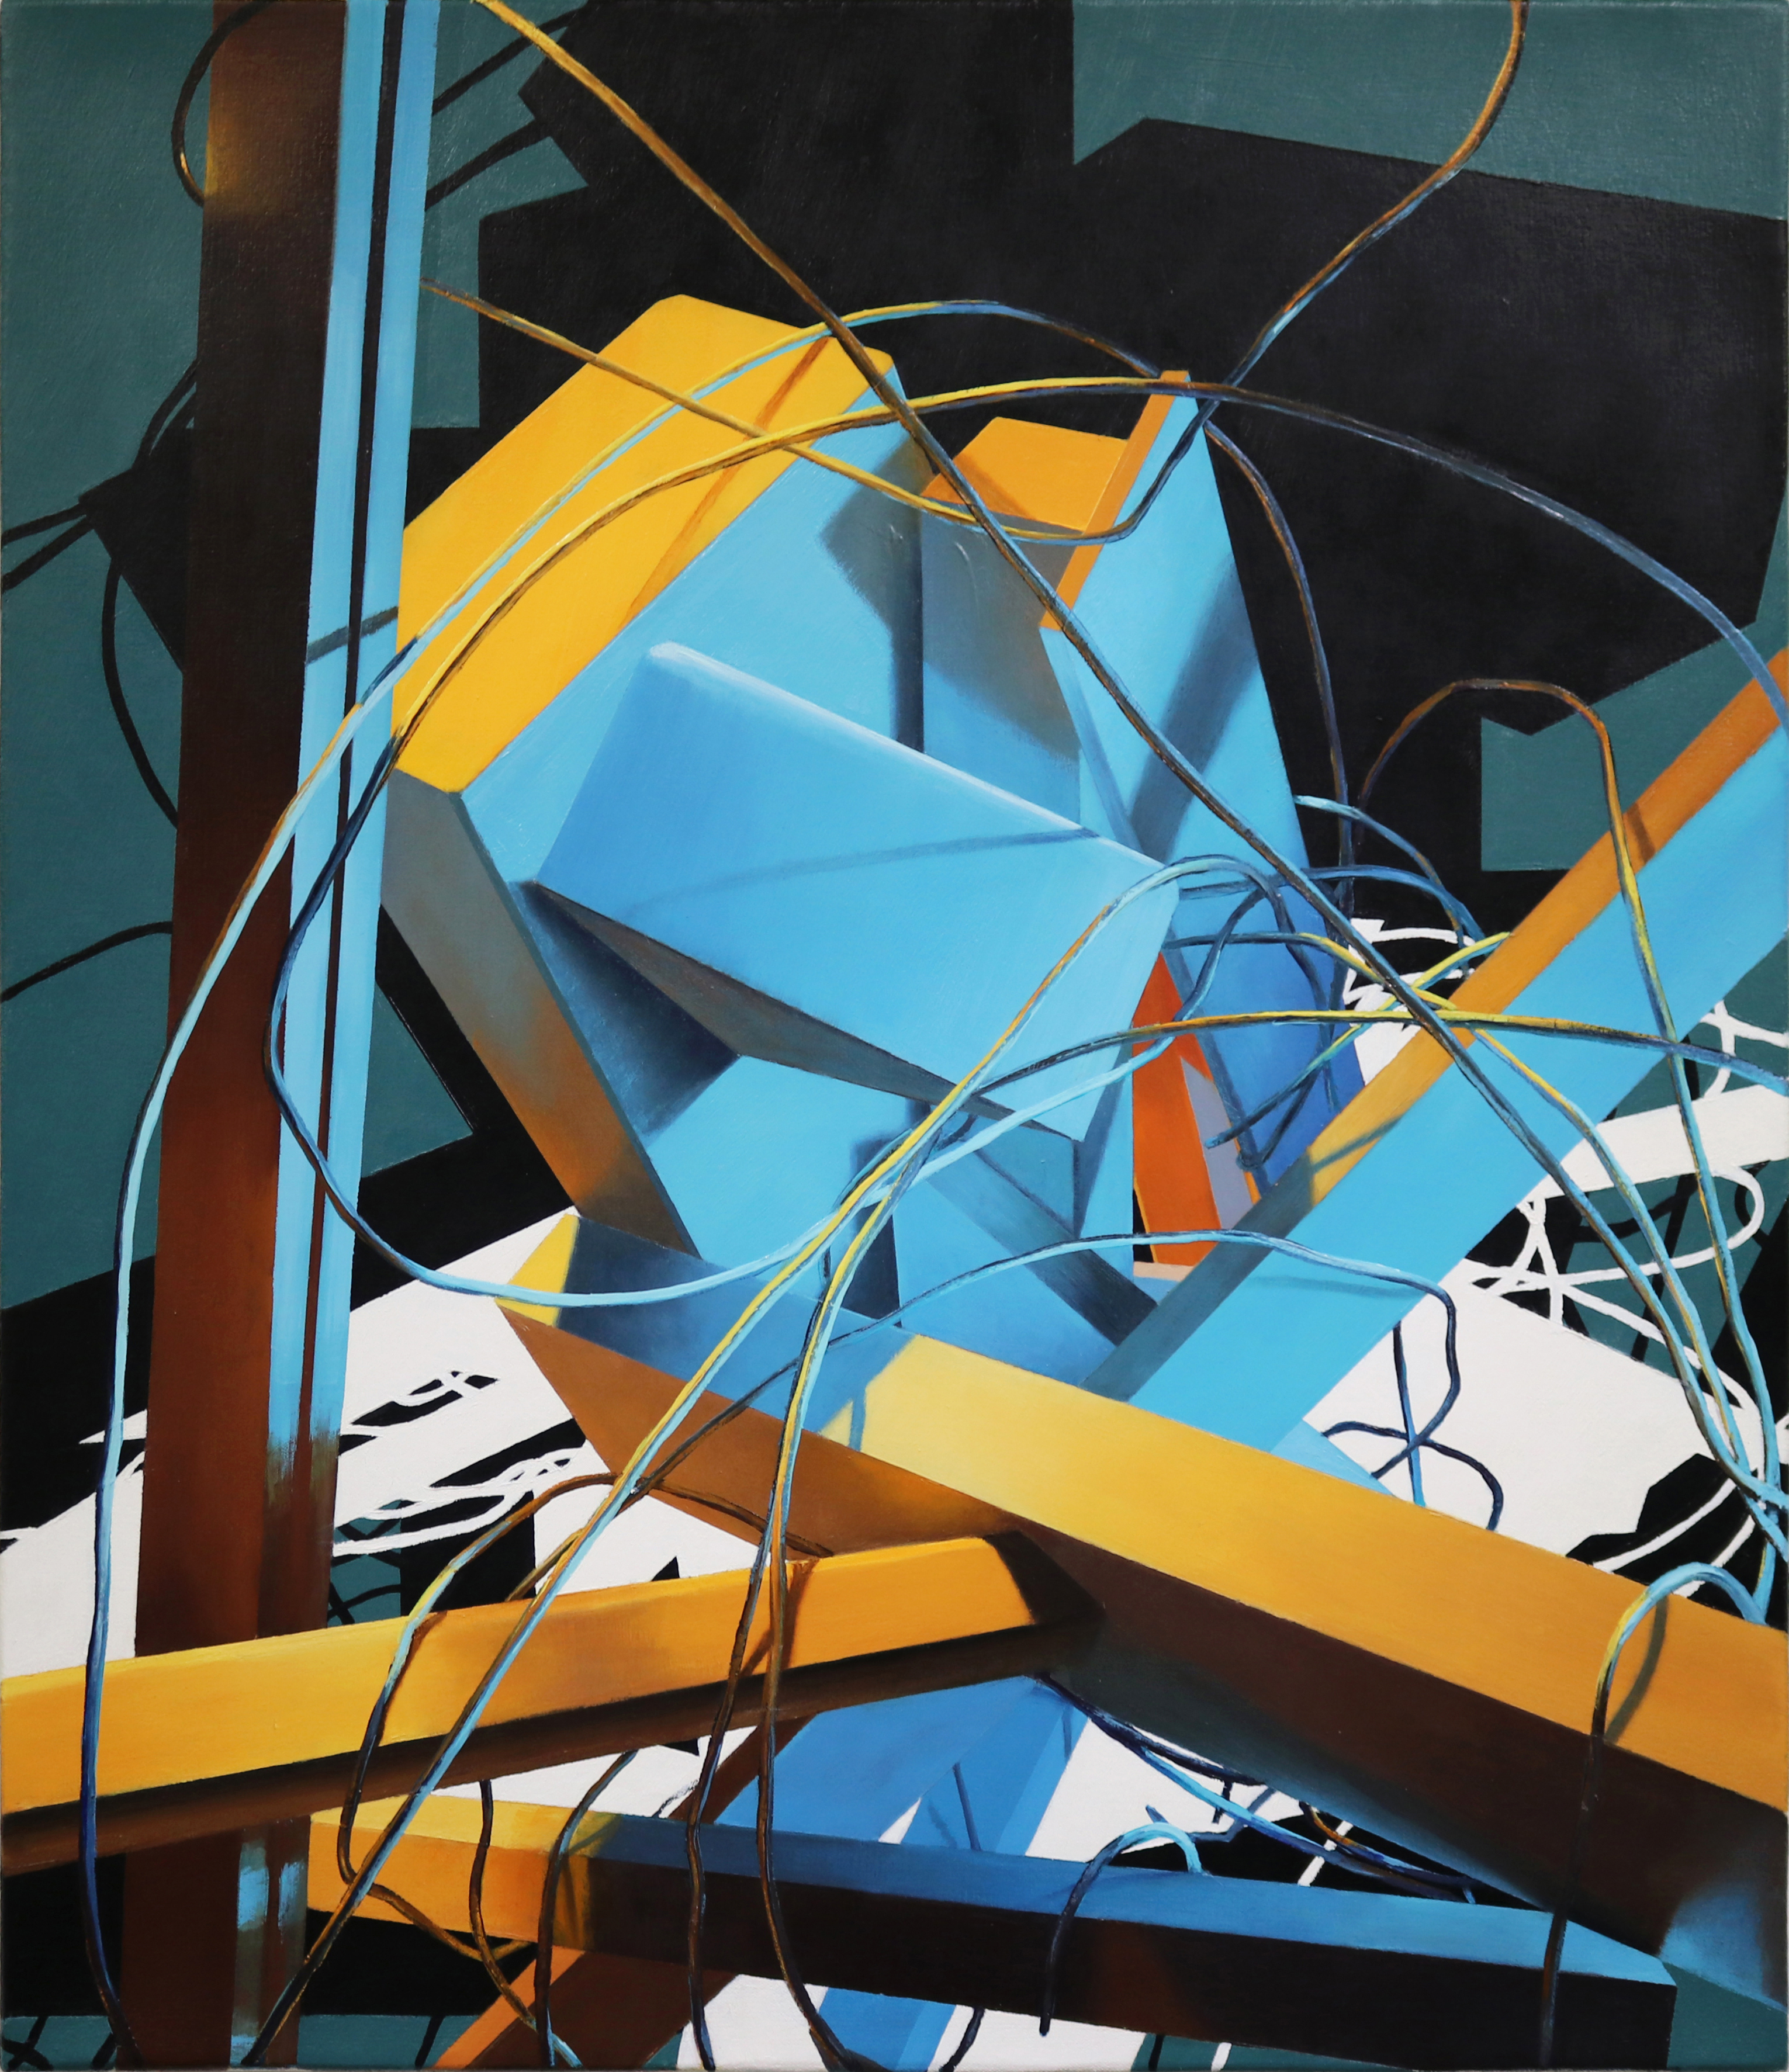 Donald Keefe, Untitled Construct 6, 2018, oil on canvas, 29" x 25"